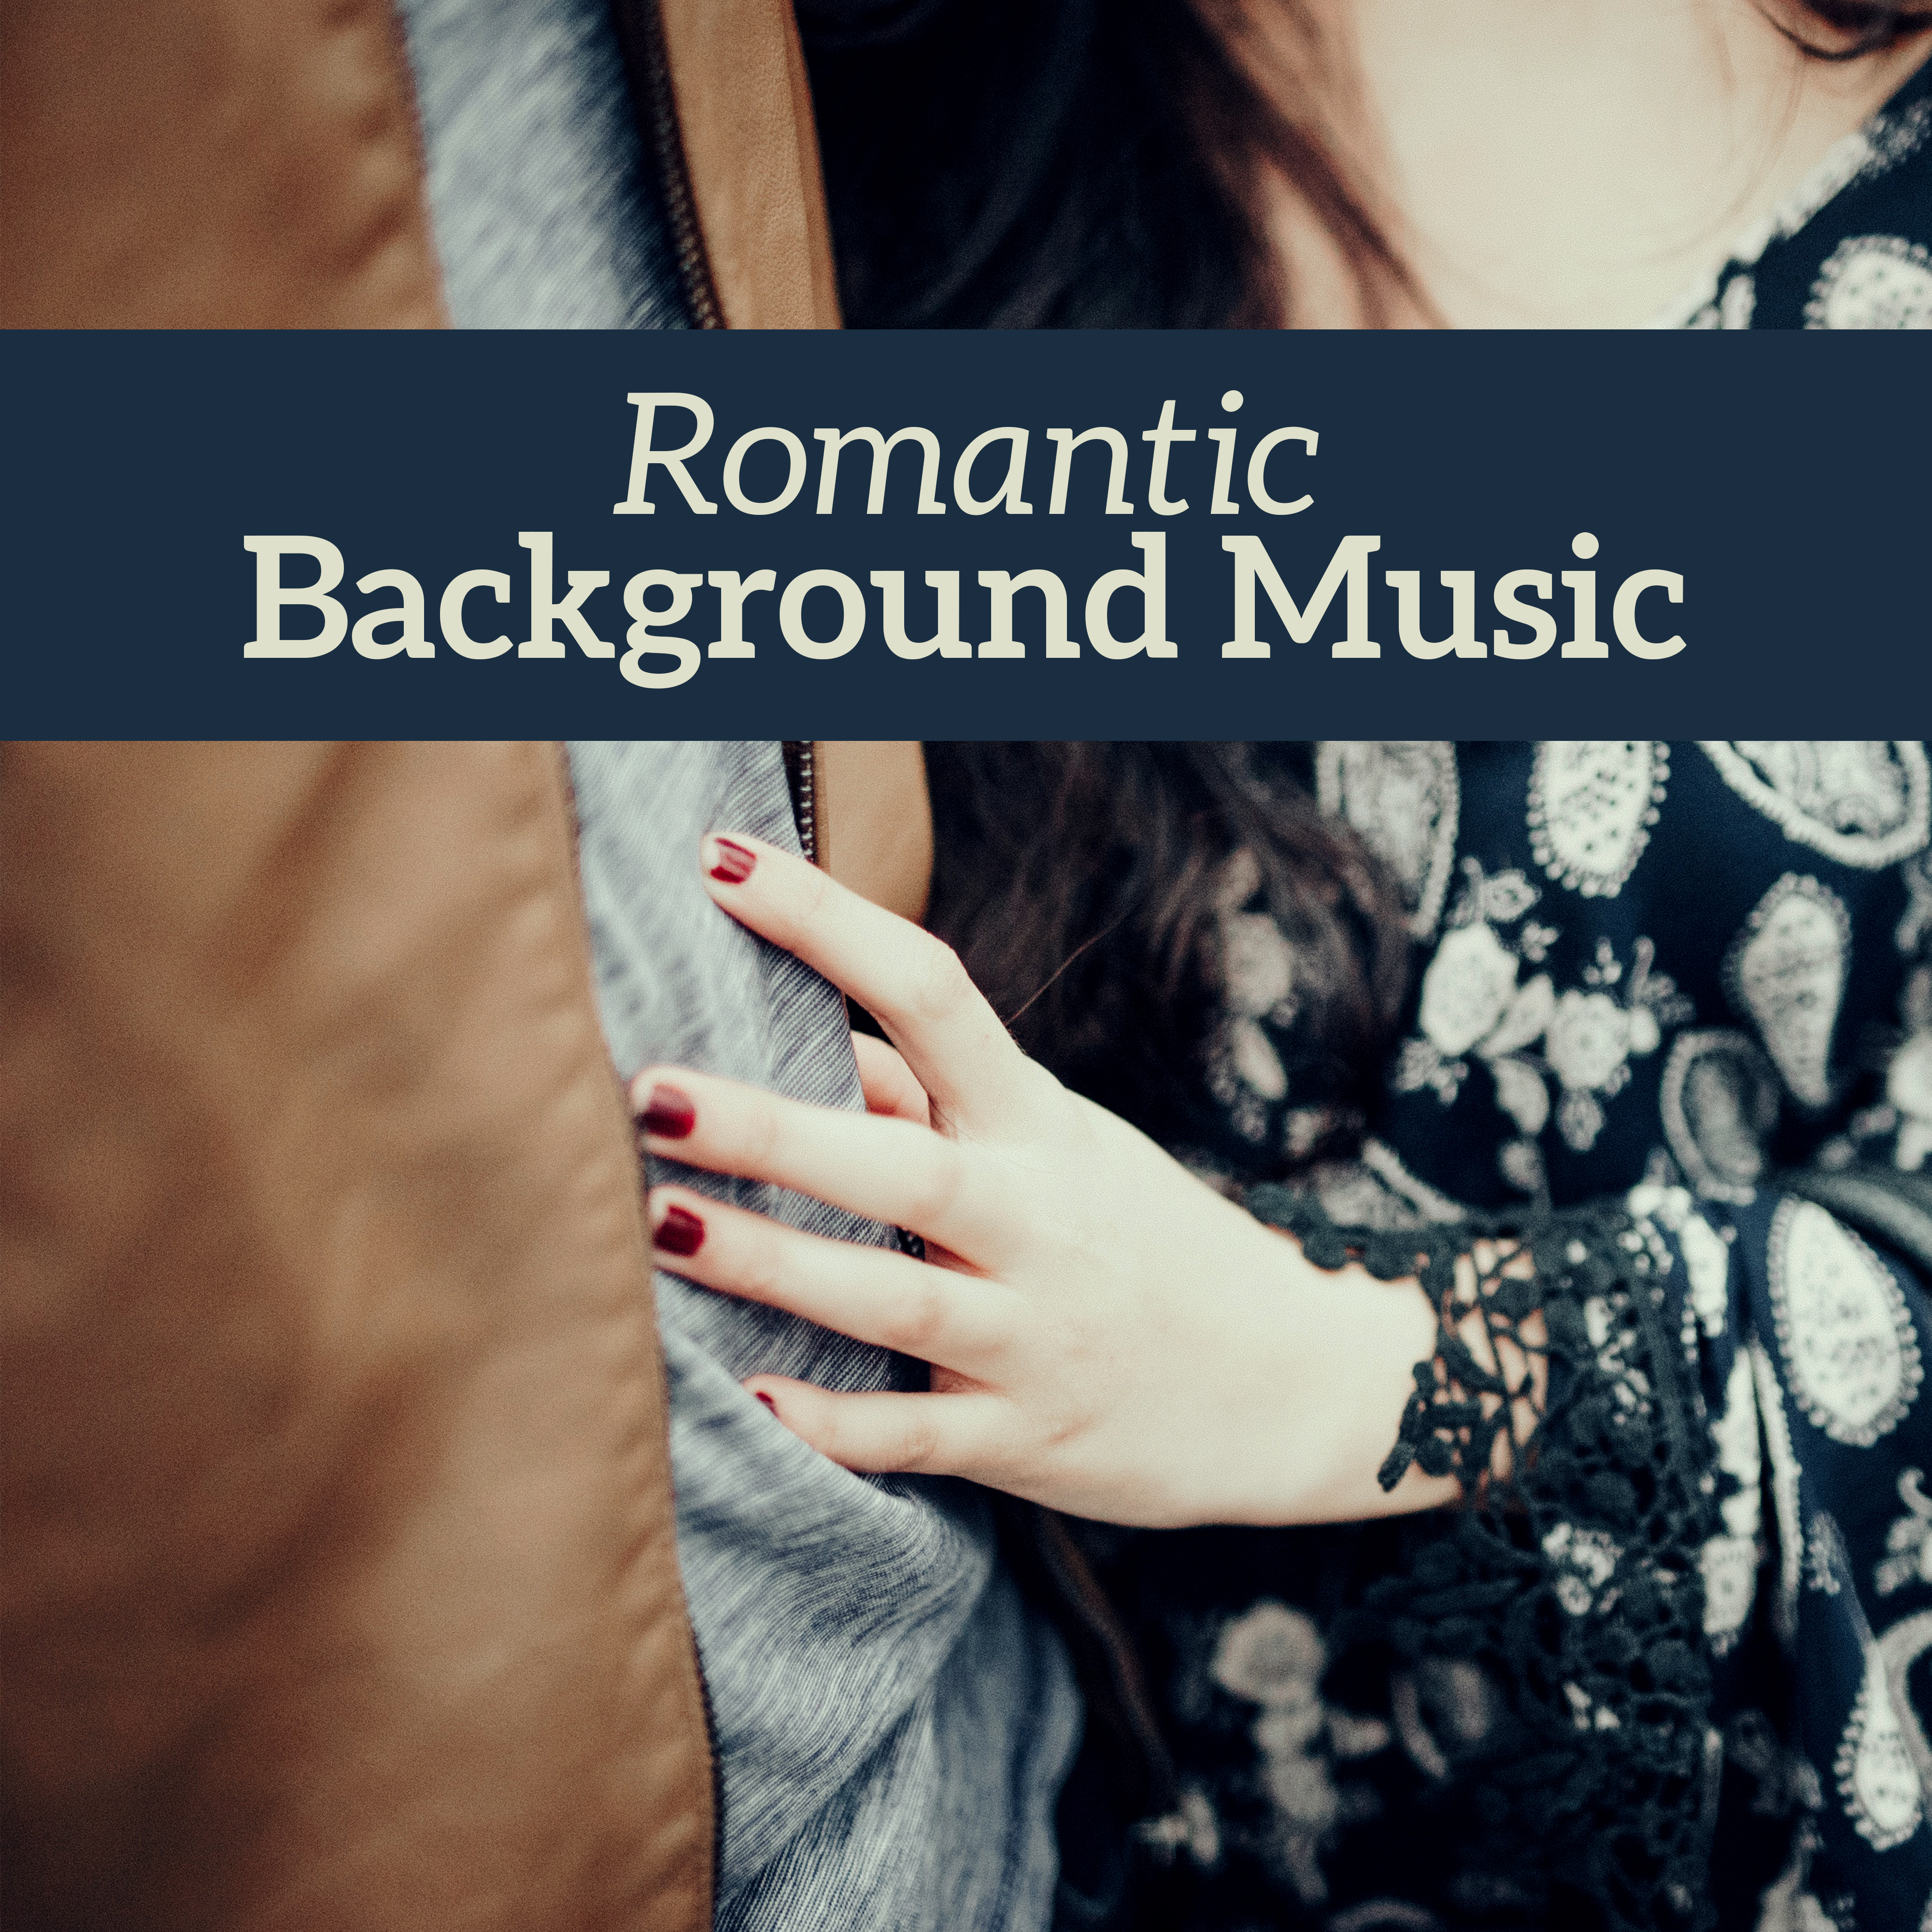 Romantic Background Music – Jazz Music for Lovers, First Kiss, Simple Love, Piano Bar